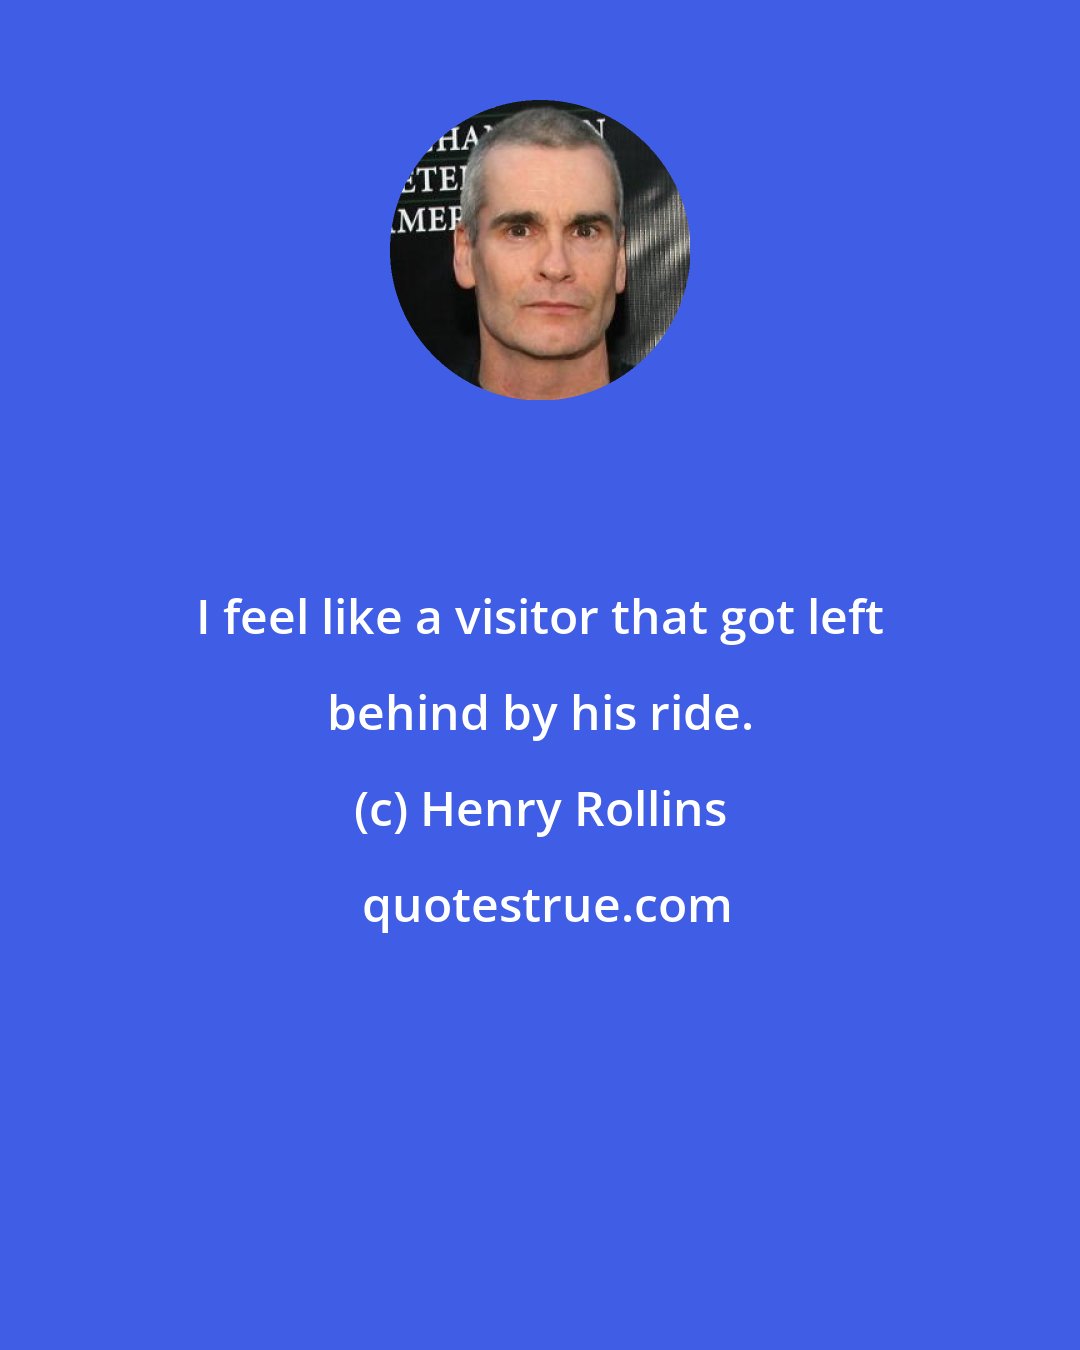 Henry Rollins: I feel like a visitor that got left behind by his ride.